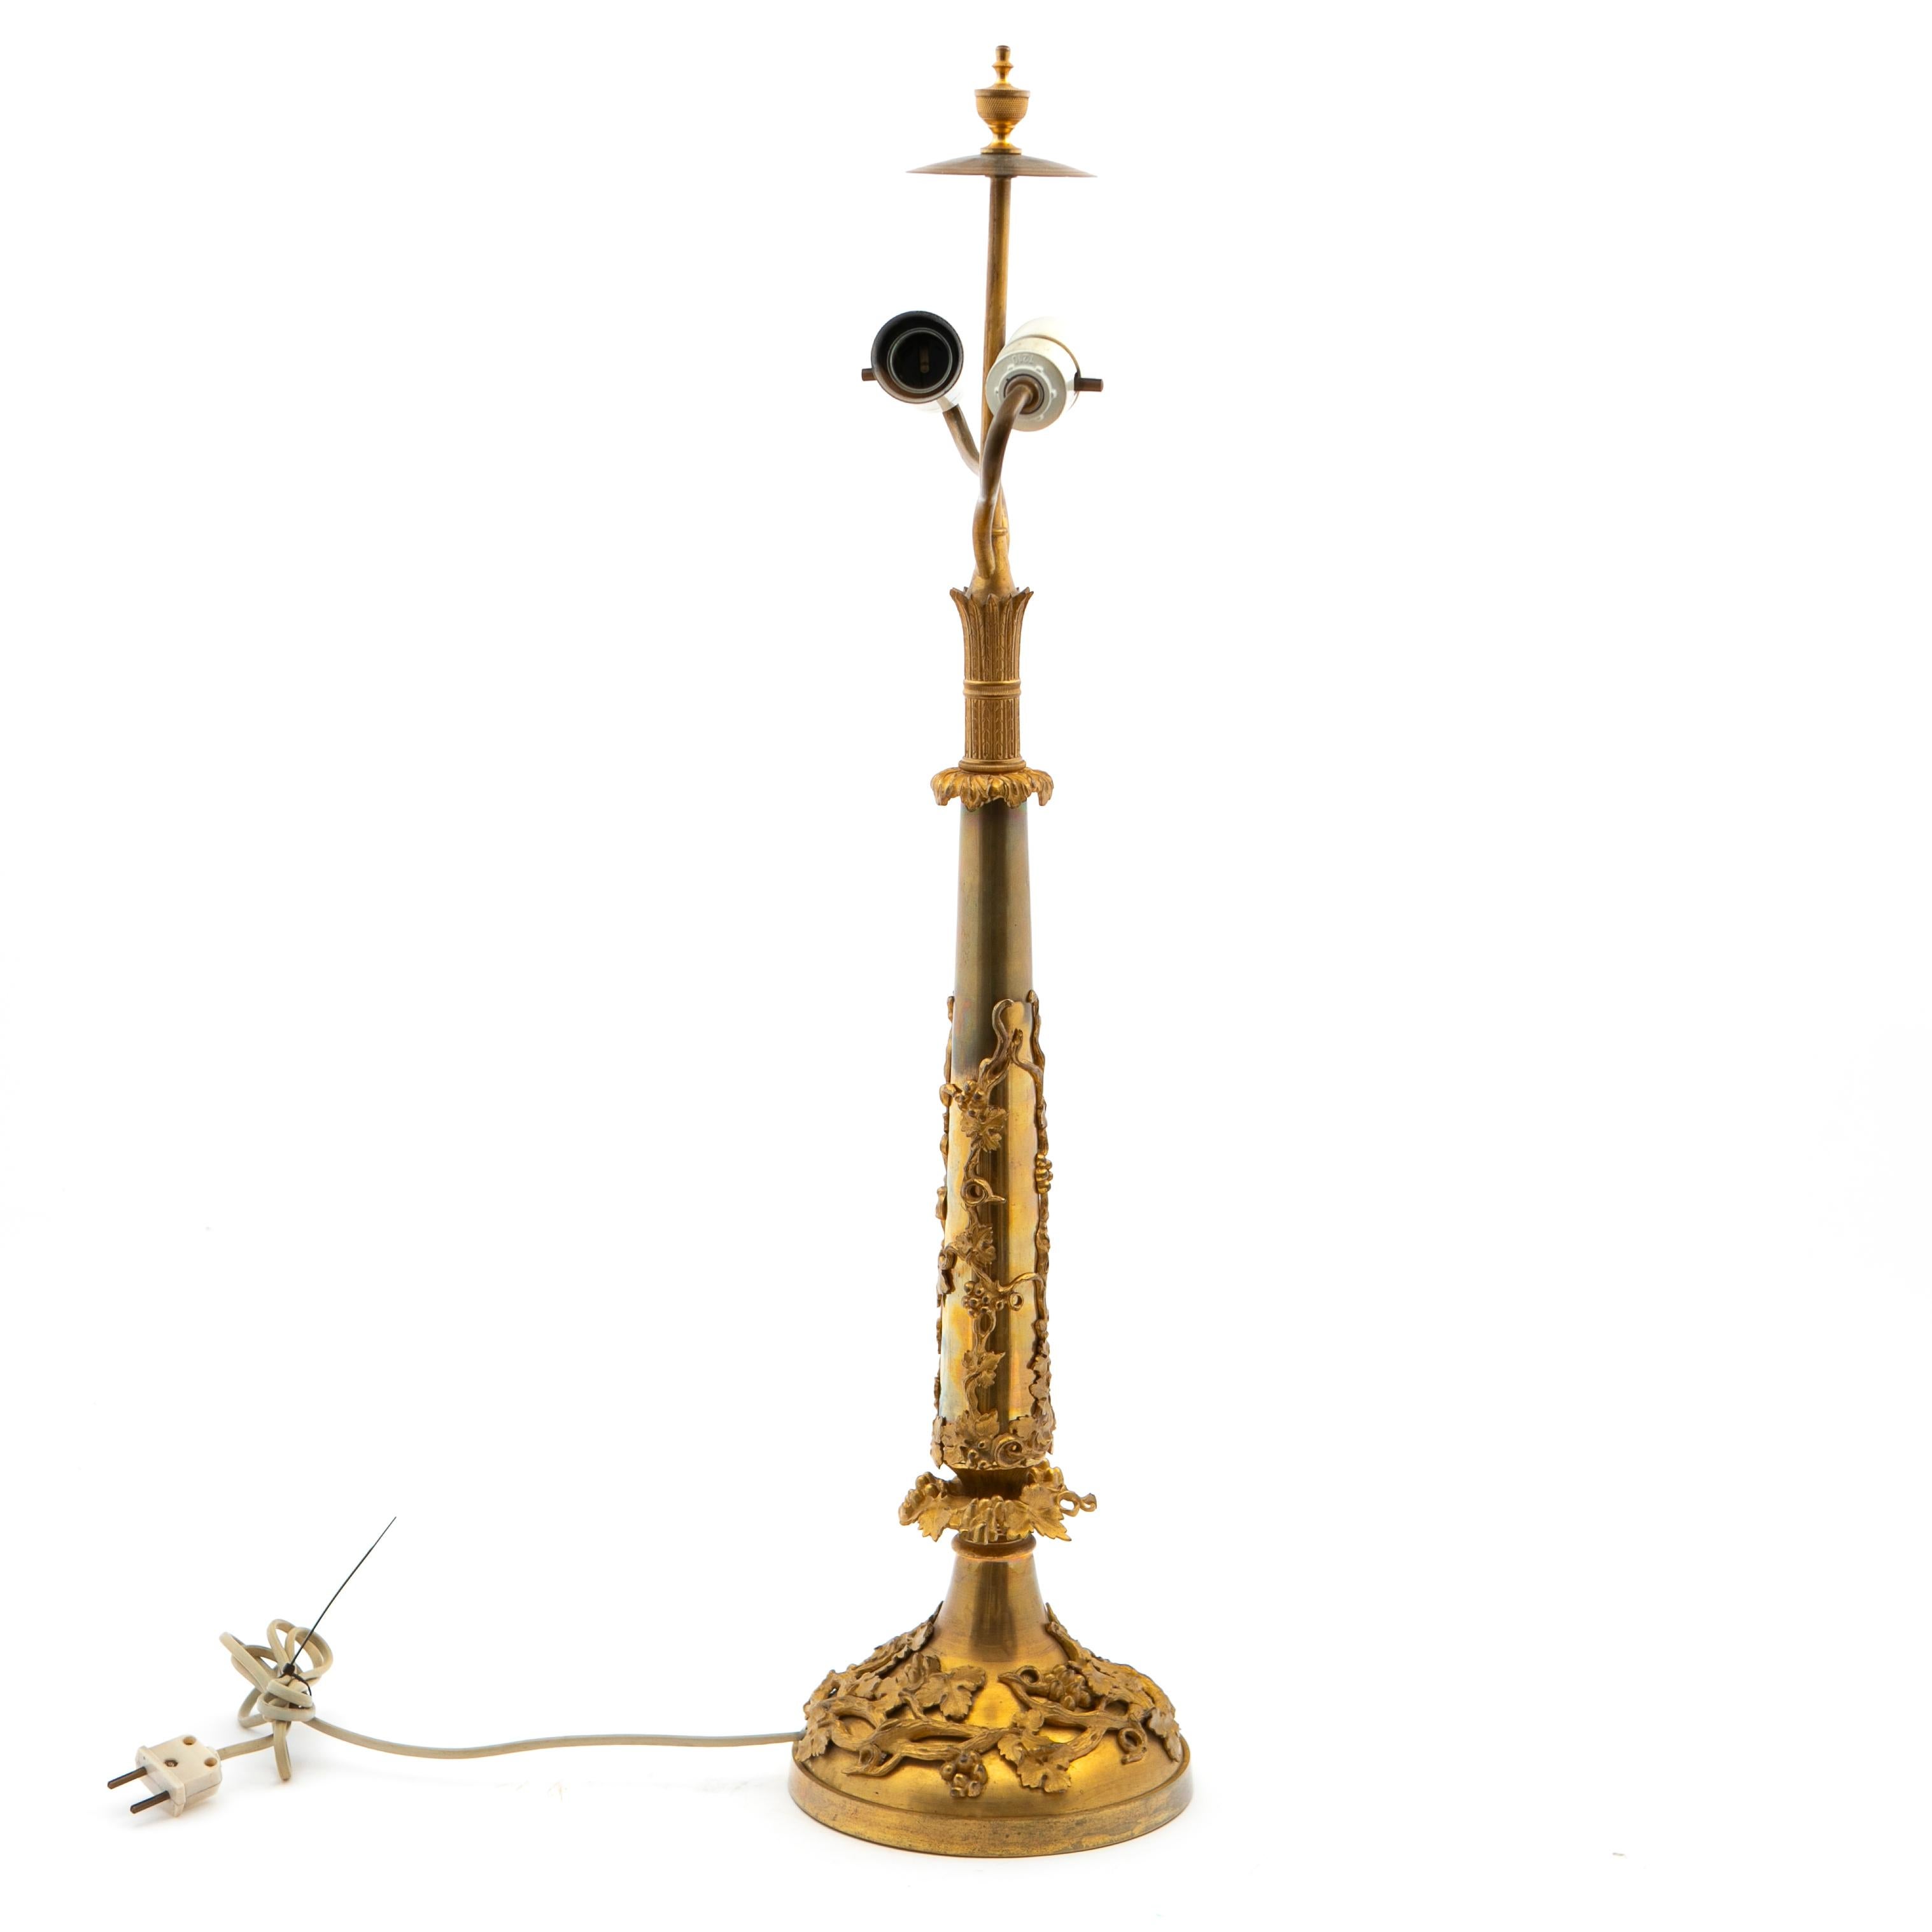 French Napoleon III 19th century ormolu table lamp with two light sources. Height to top: 77 cm.
Circular base and tapered central support mounted with gilt bronze grapes and foliate details. The top of the stem adorned with ears of corn.

Later